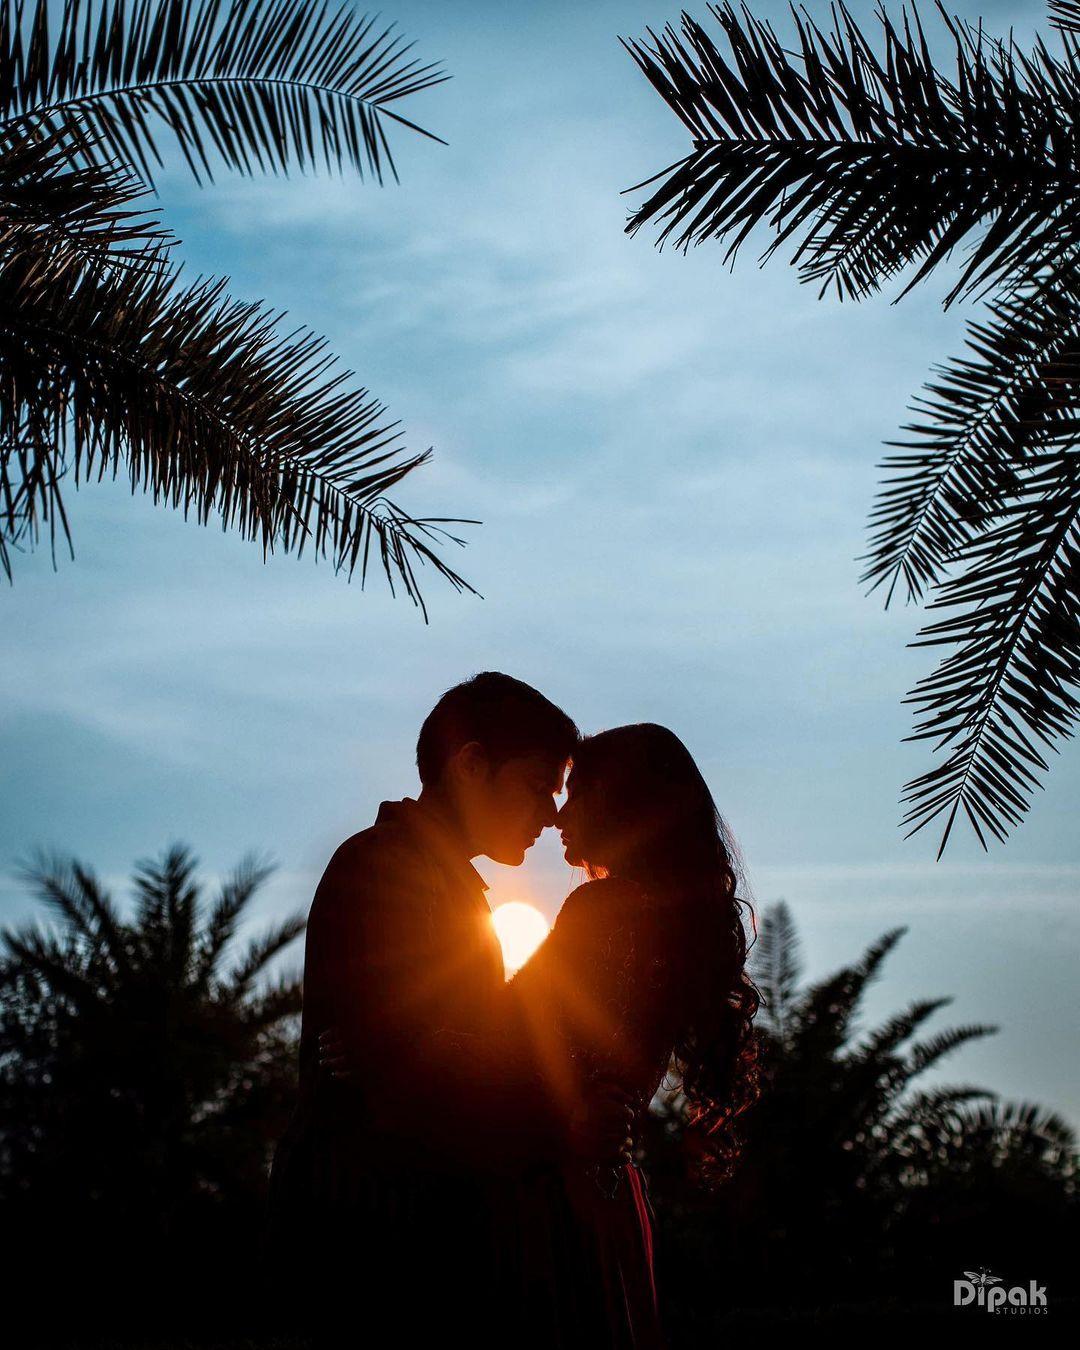 Couple Sunset Beach Photography Poses and Ideas - Lemon8 Search